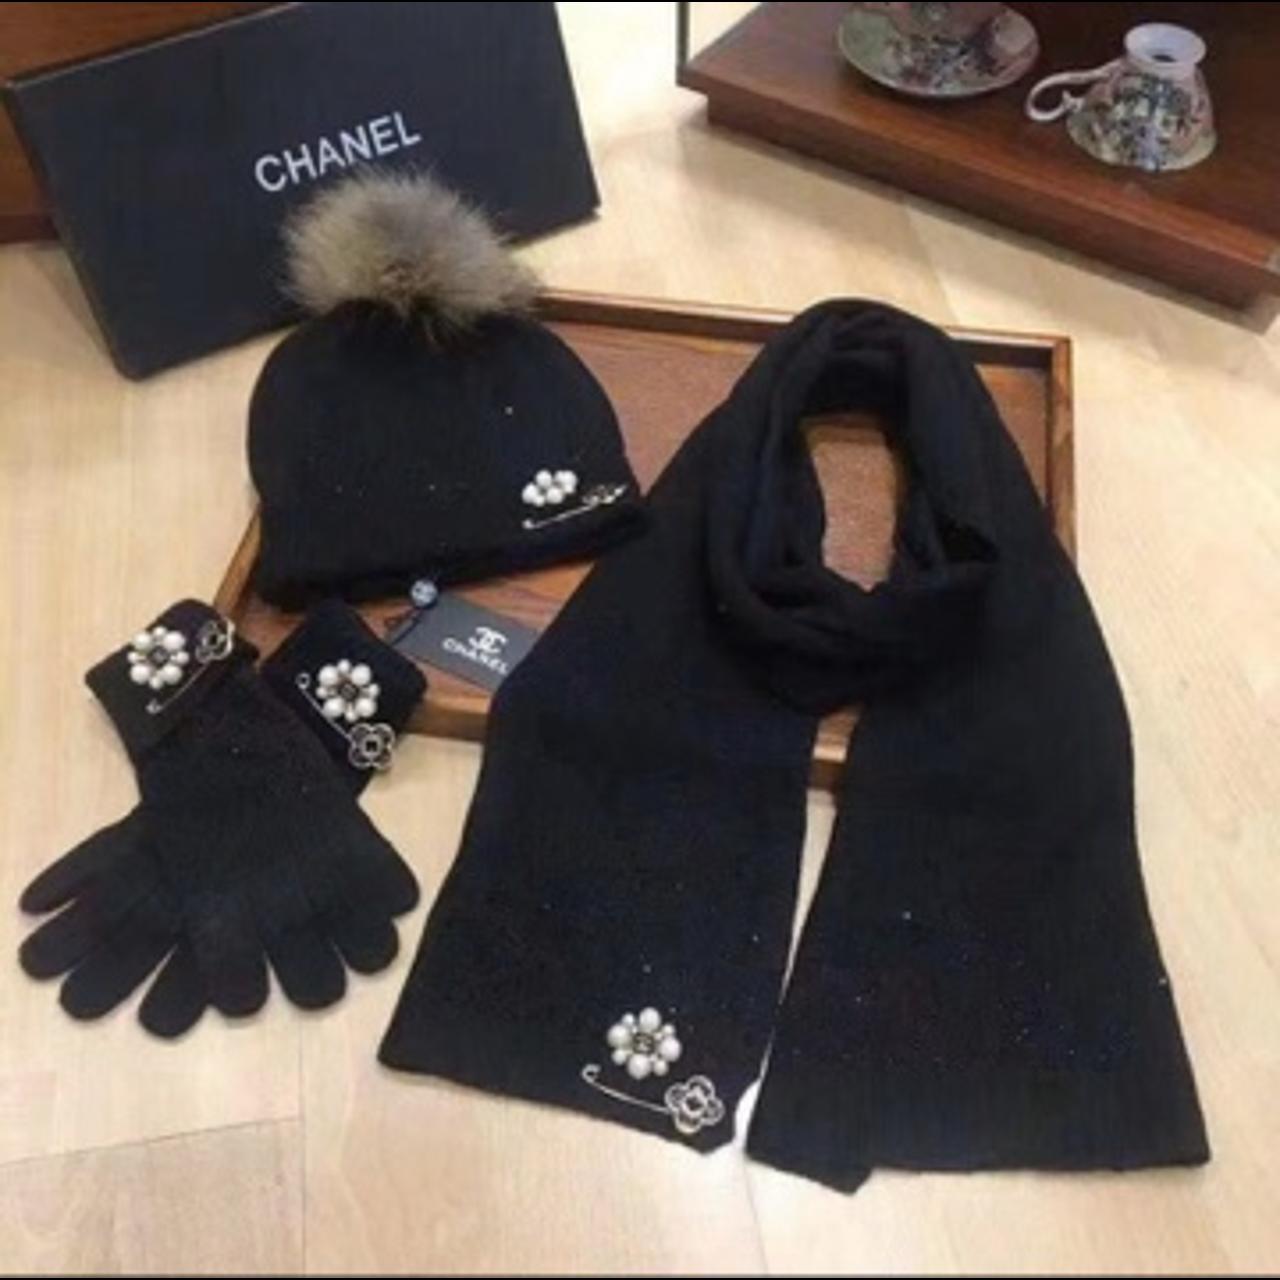 Chanel matching scarf glove and hat set